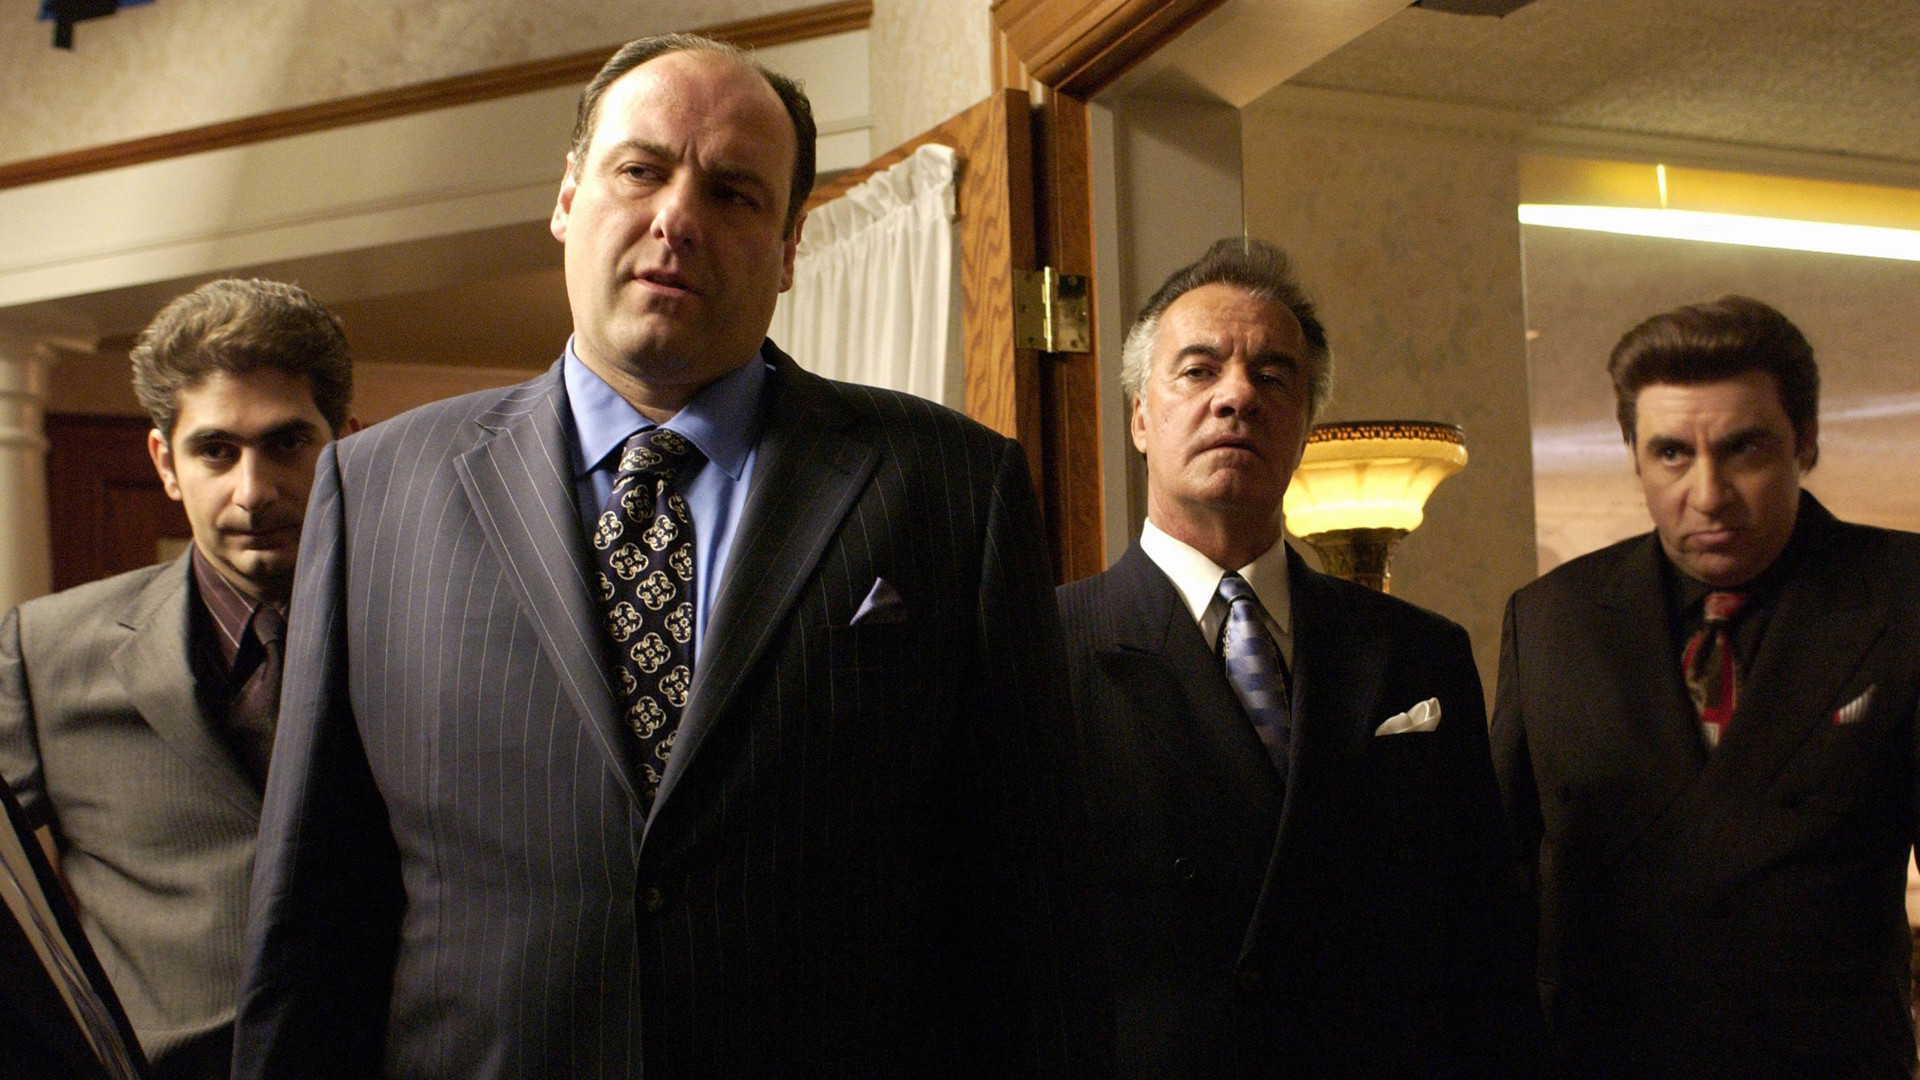 Here are the first images of young Tony Soprano in the prequel movie